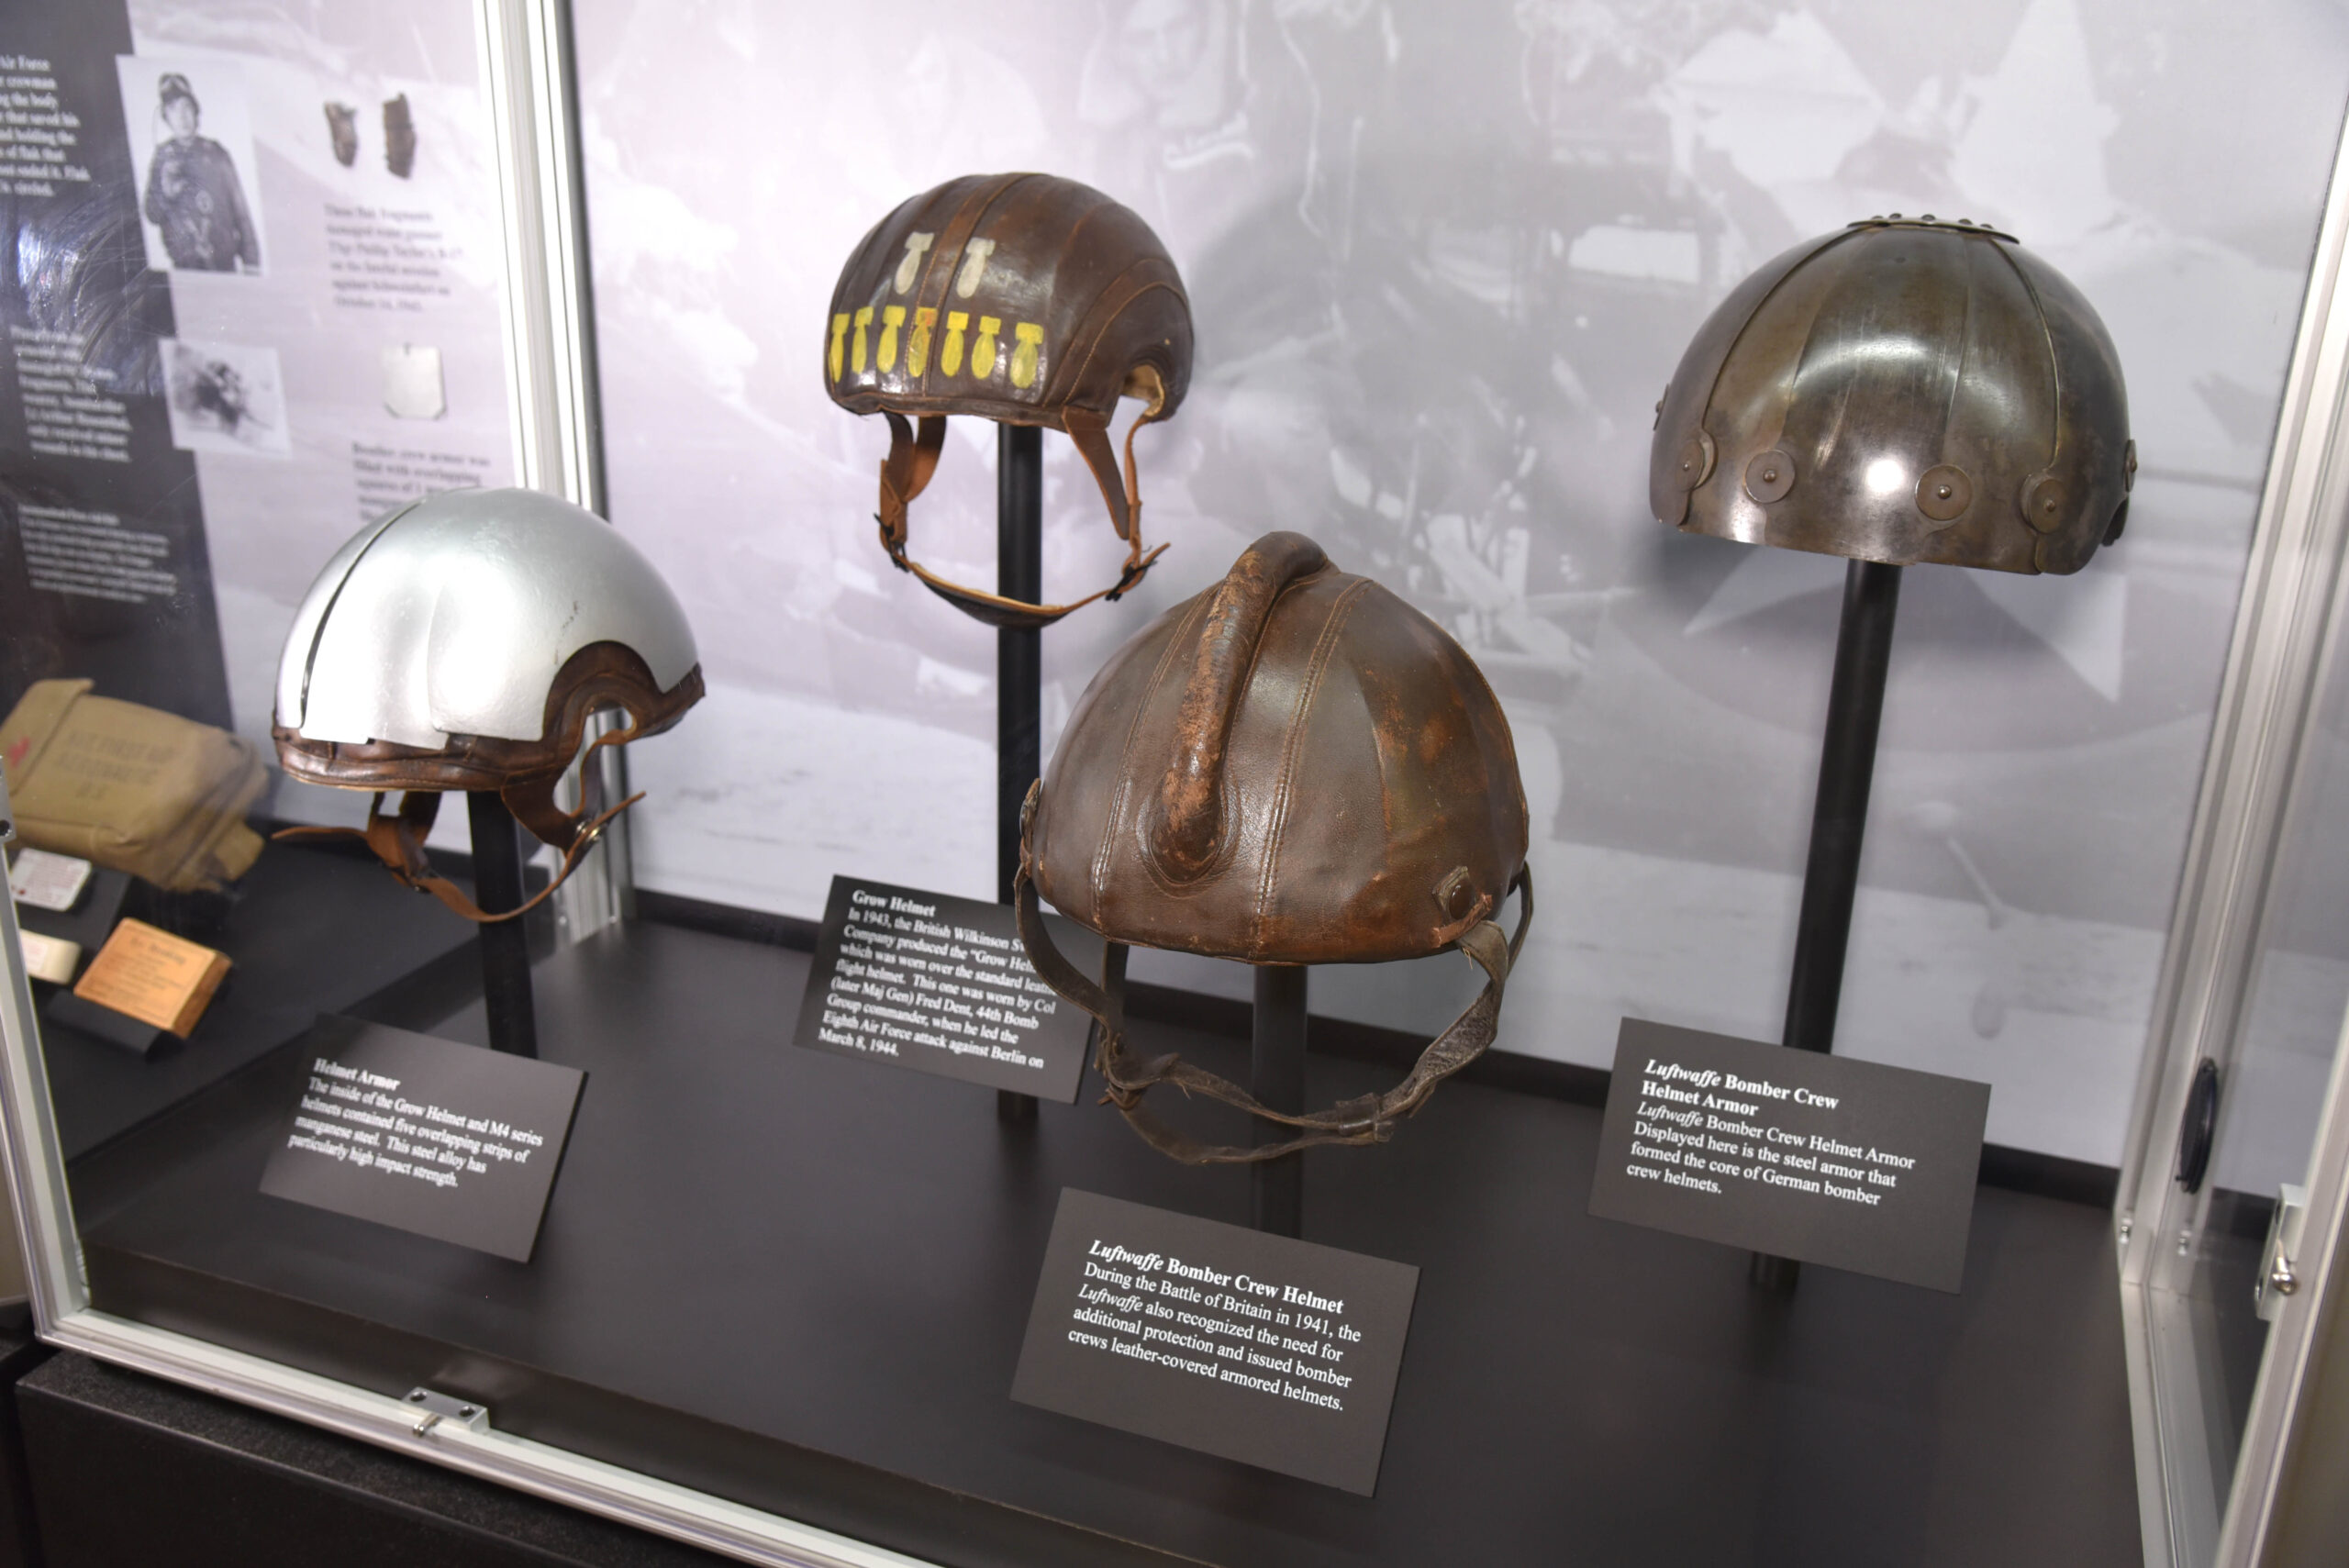 WWII bomber crew helmets at the National Museum of the United States Air Force